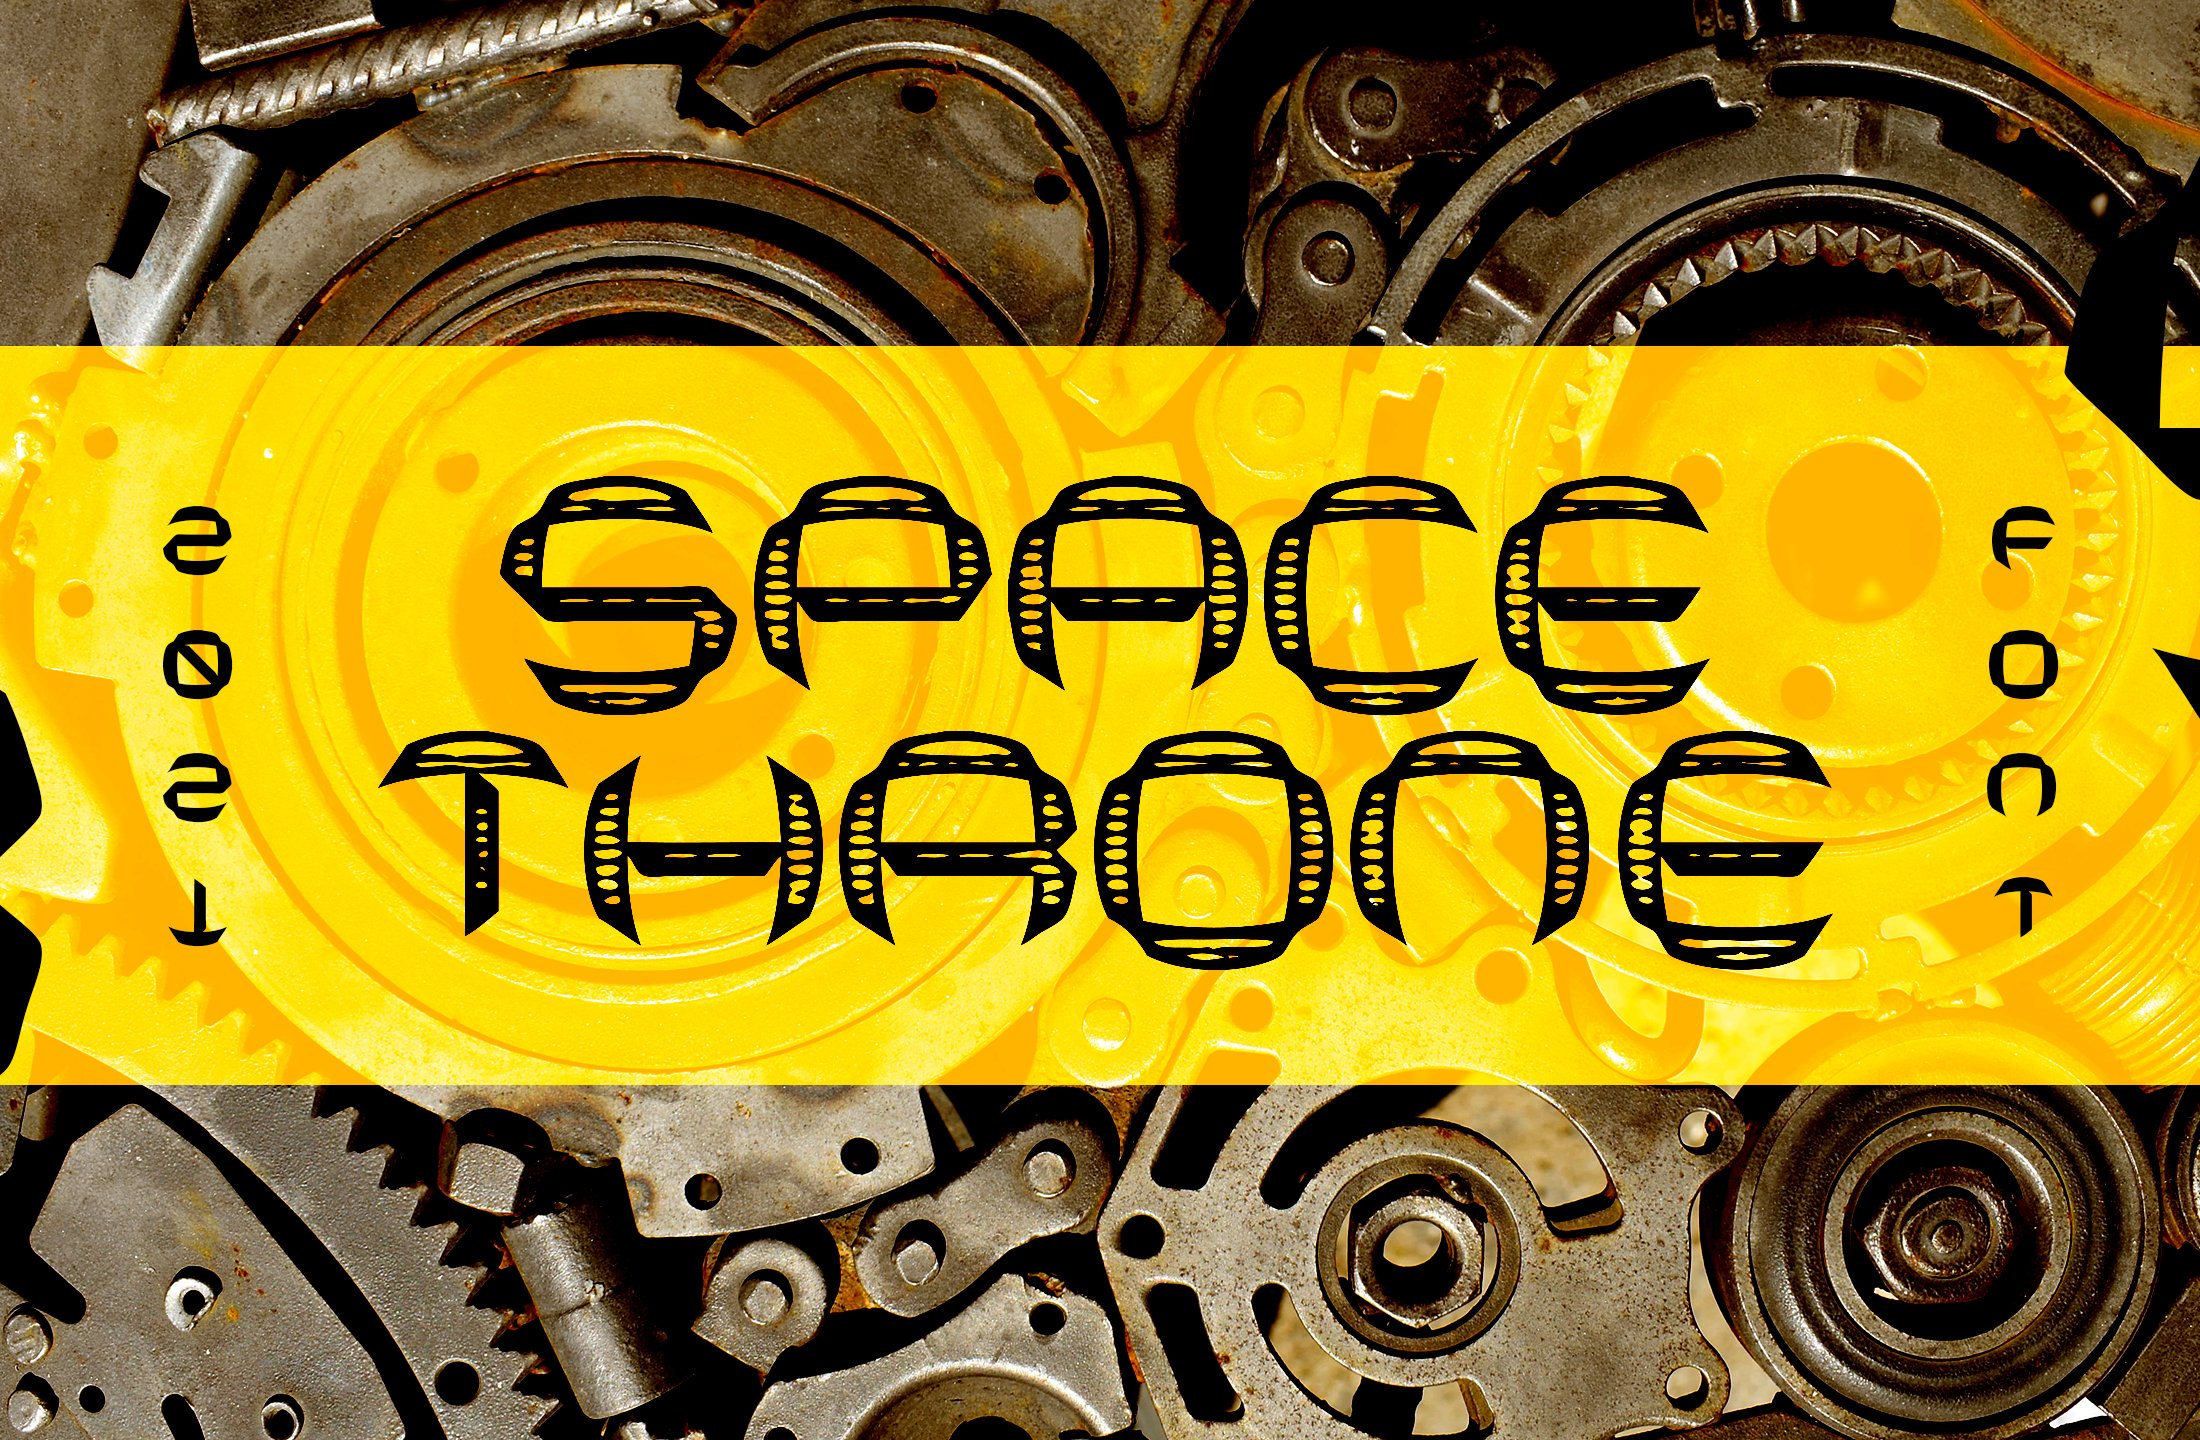 Space Throne cover image.